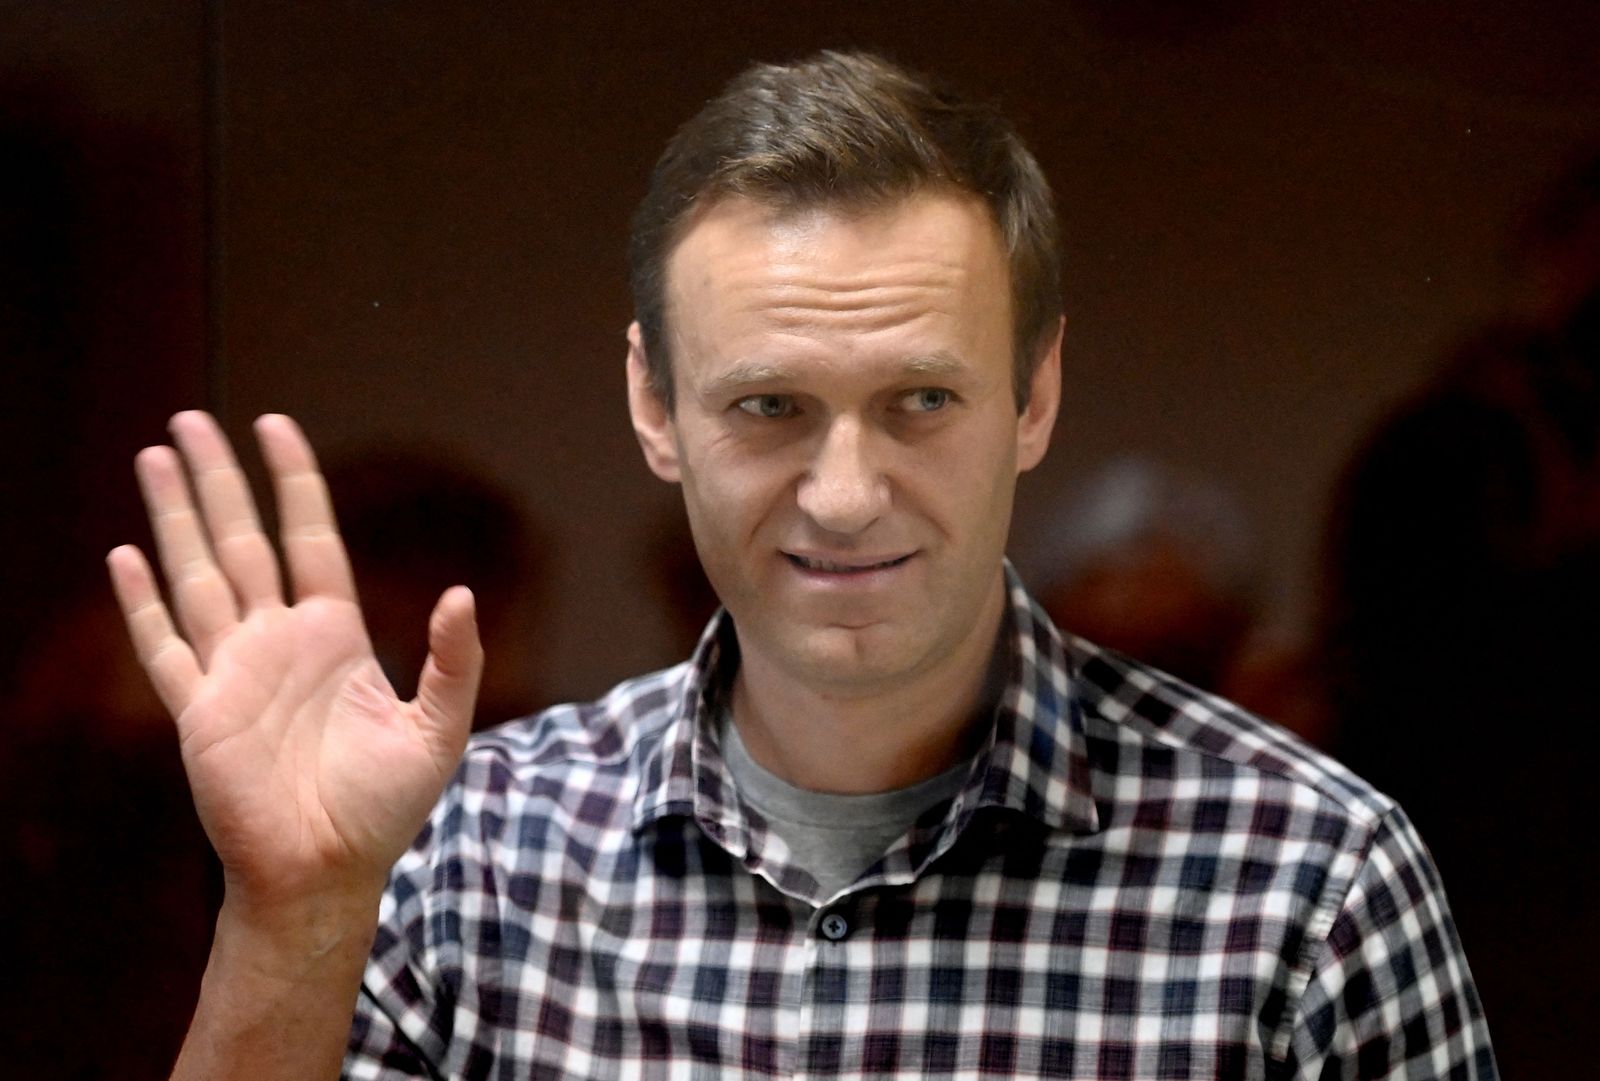 (FILES) In this file photograph taken on February 20, 2021, Russian opposition leader Alexei Navalny stands inside a glass cell during a court hearing at the Babushkinsky district court in Moscow. - Russia on January 25, 2022,  added jailed Kremlin critic Alexei Navalny to a list of 